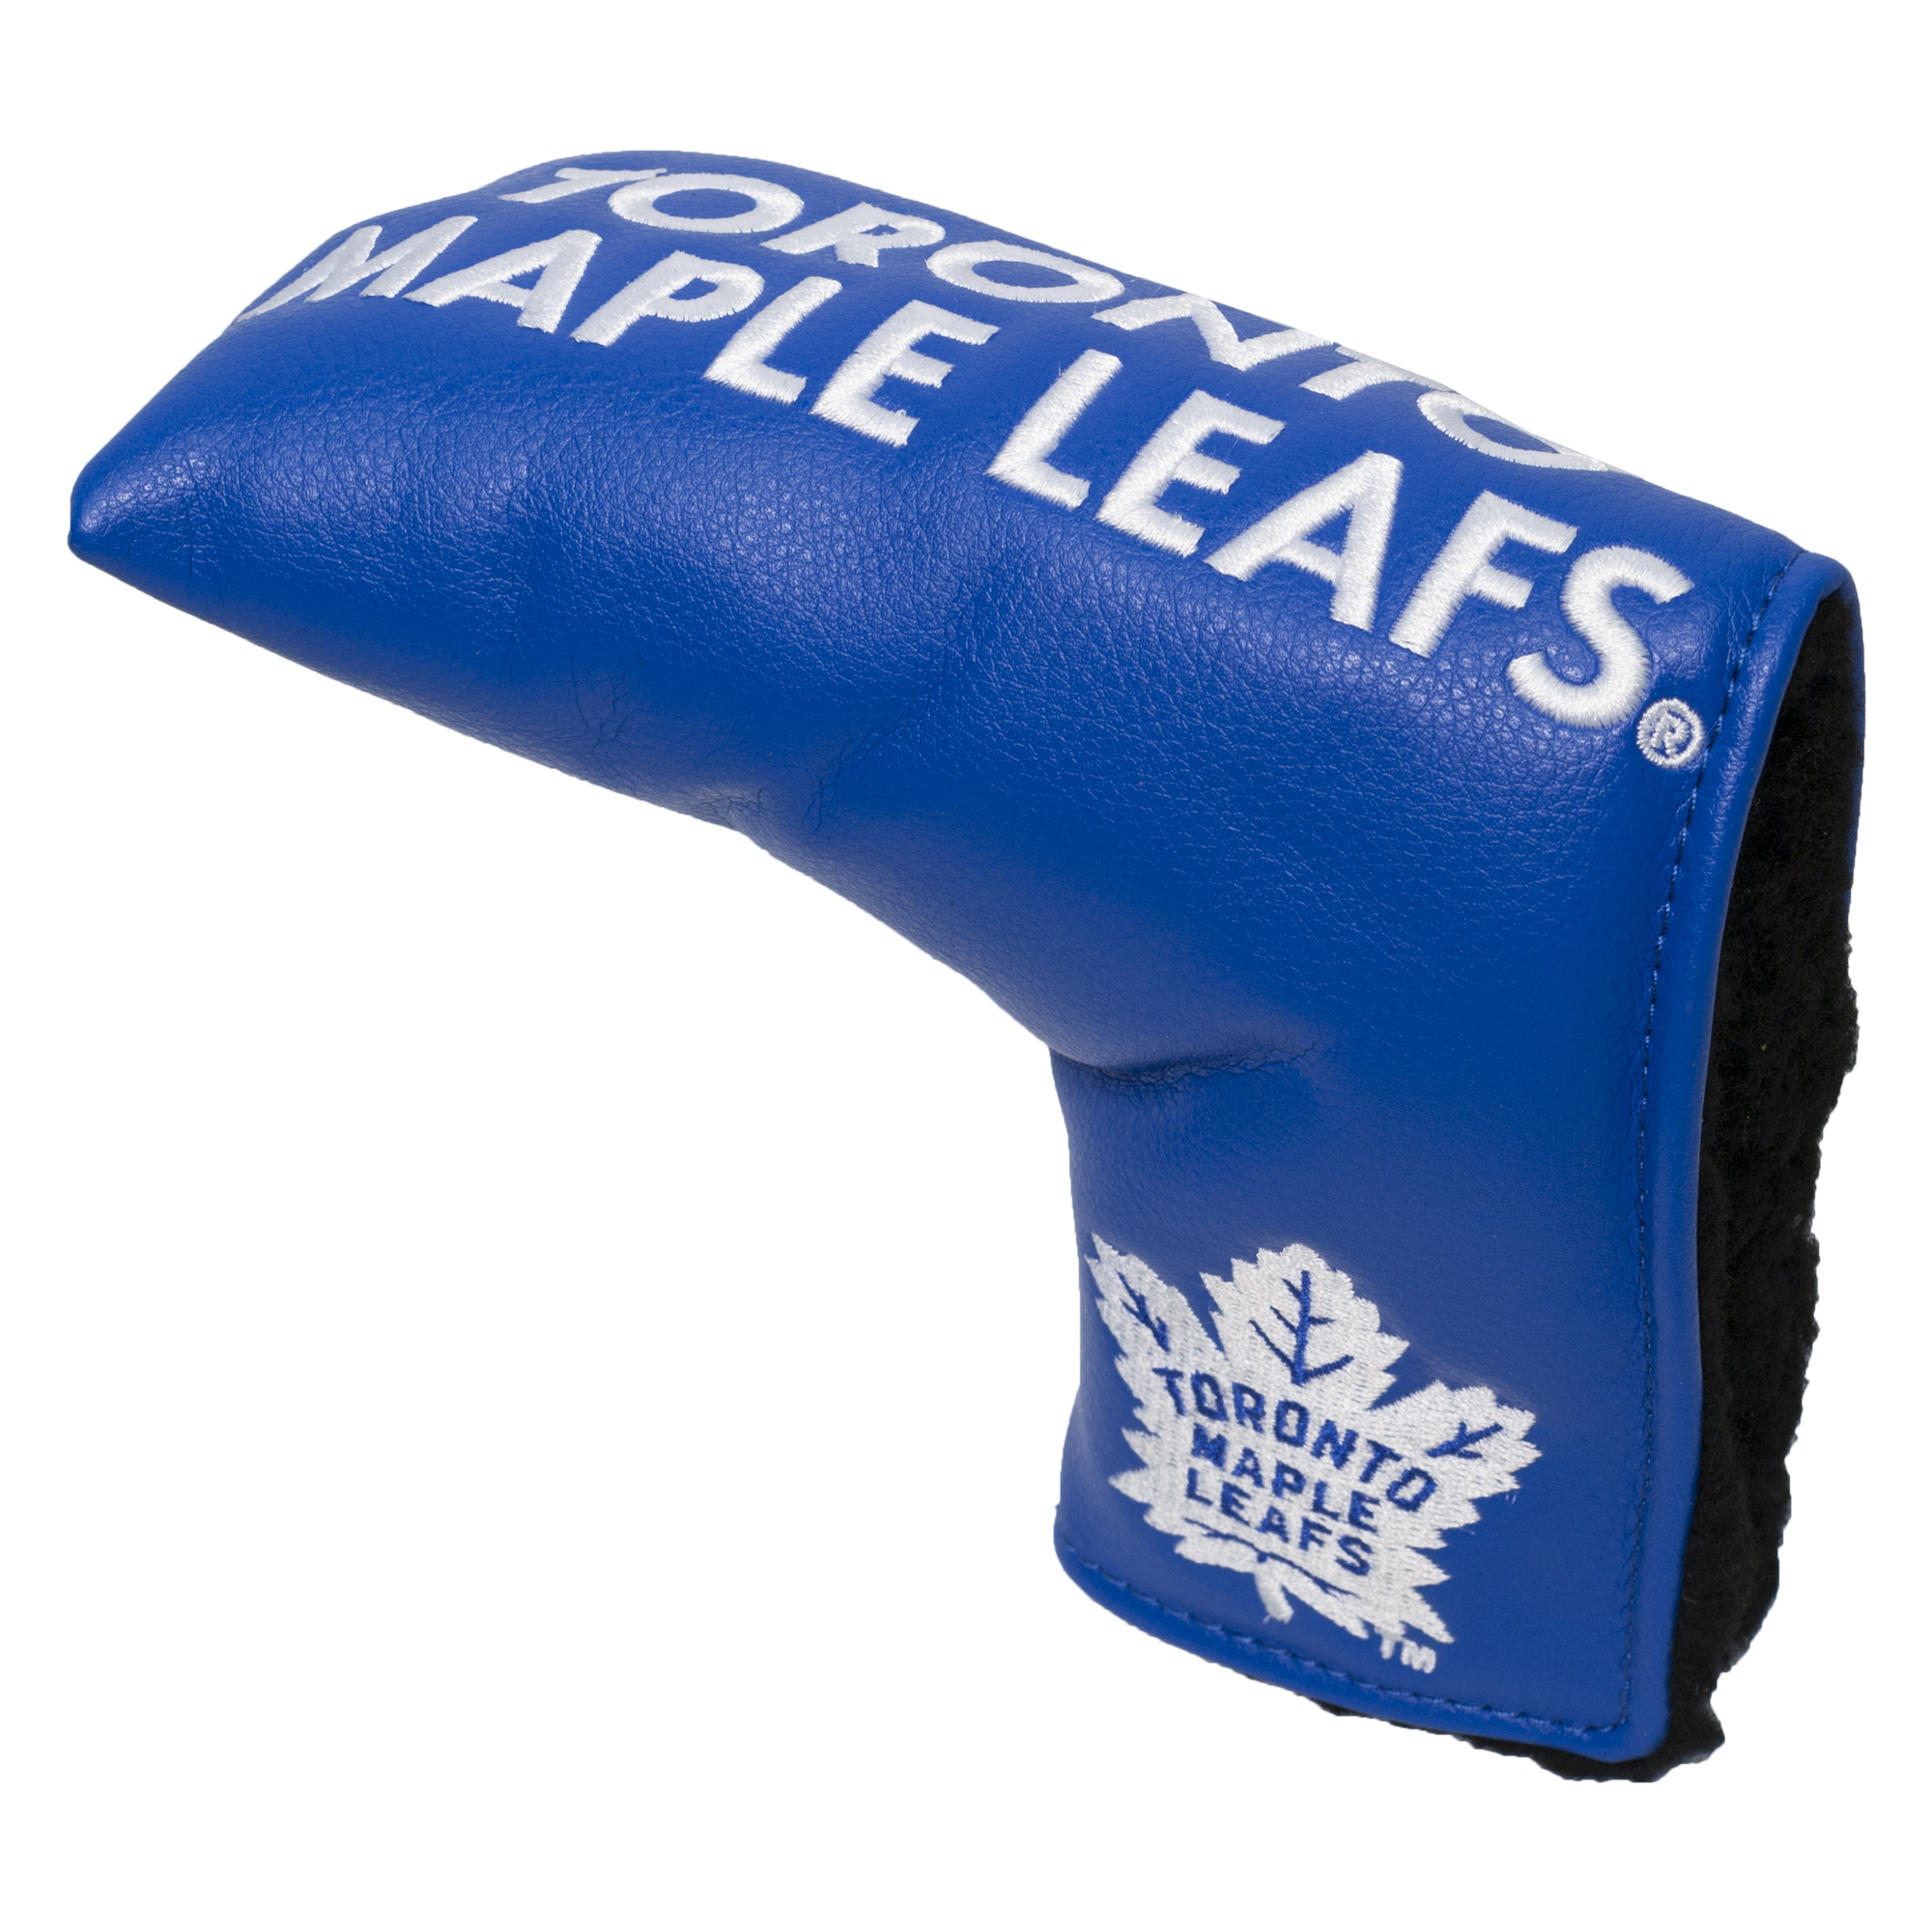 Toronto Maple Leafs Vintage Blade Putter Cover